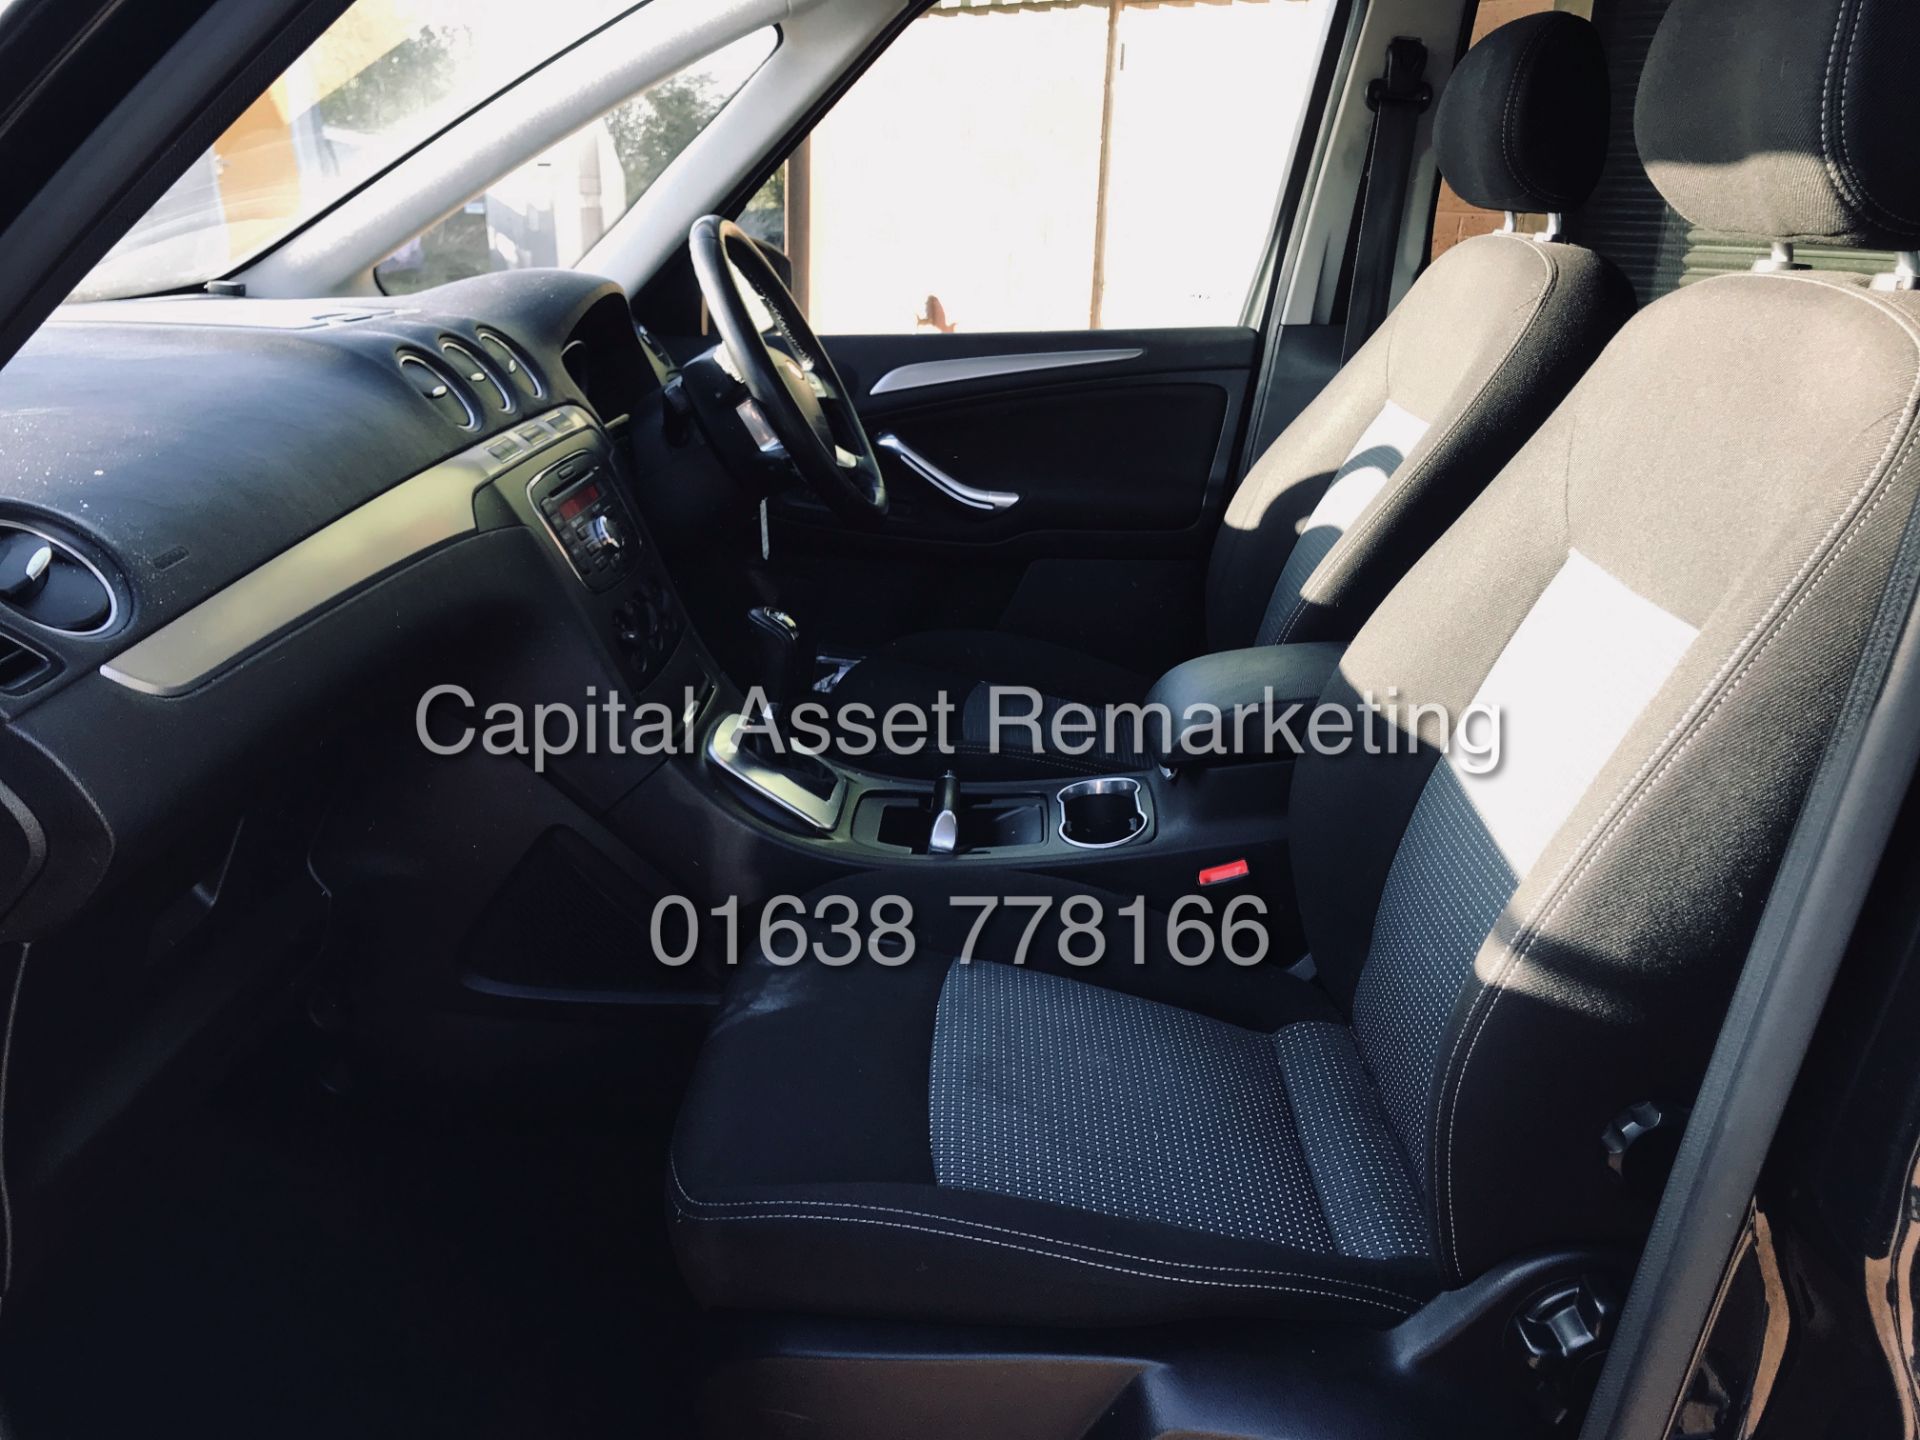 On Sale FORD GALAXY 2.0TDCI "ZETEC - POWERSHIFT" 7 SEATER (15 REG) AIR CON - 1 OWNER - 140BHP ENGINE - Image 8 of 17